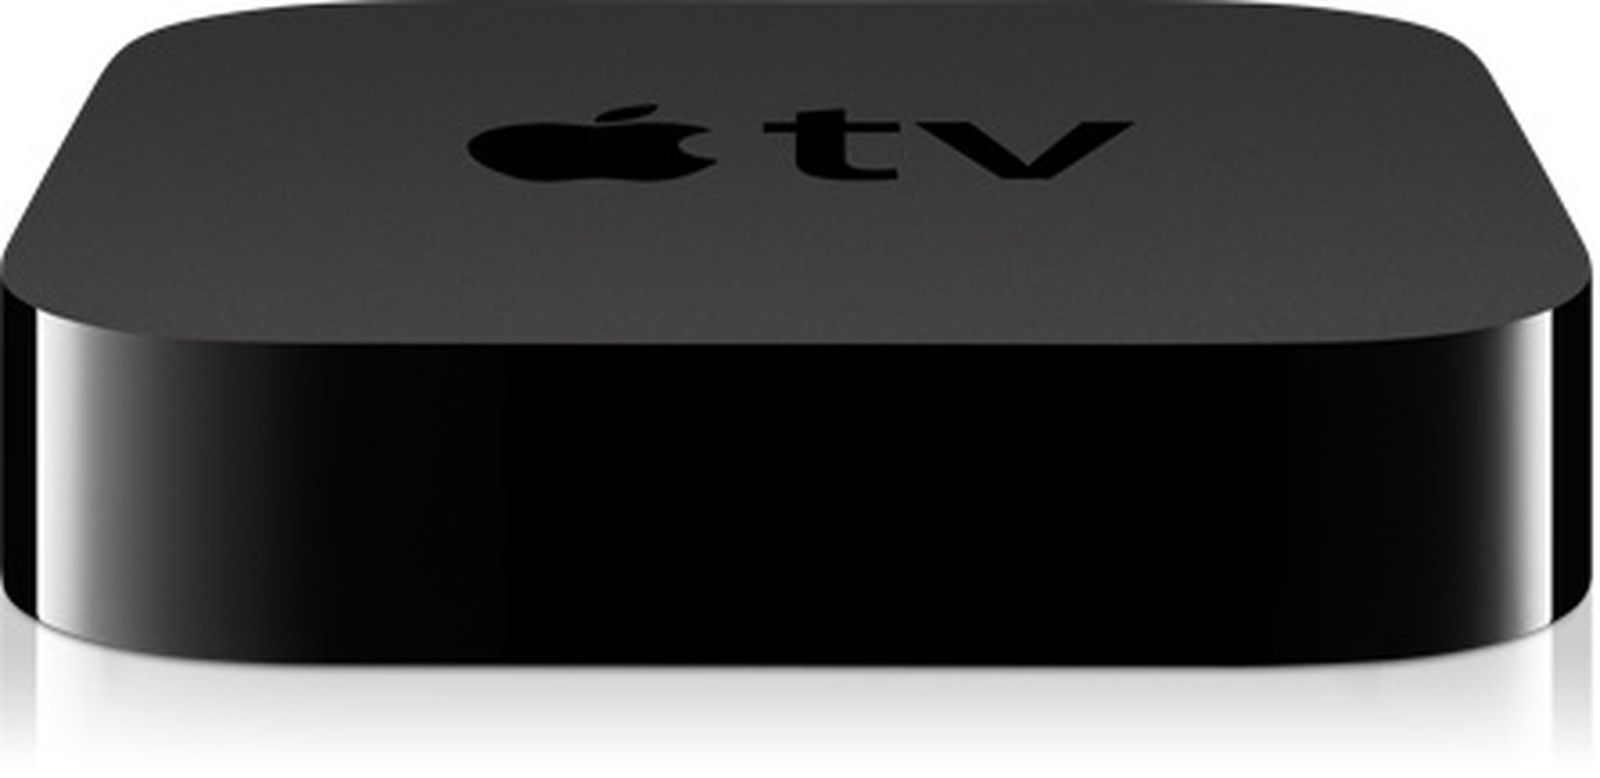 Apple TV Updated for 5.2 Software, Third-Generation Model and Some Plug-ins Still Unsupported - MacRumors